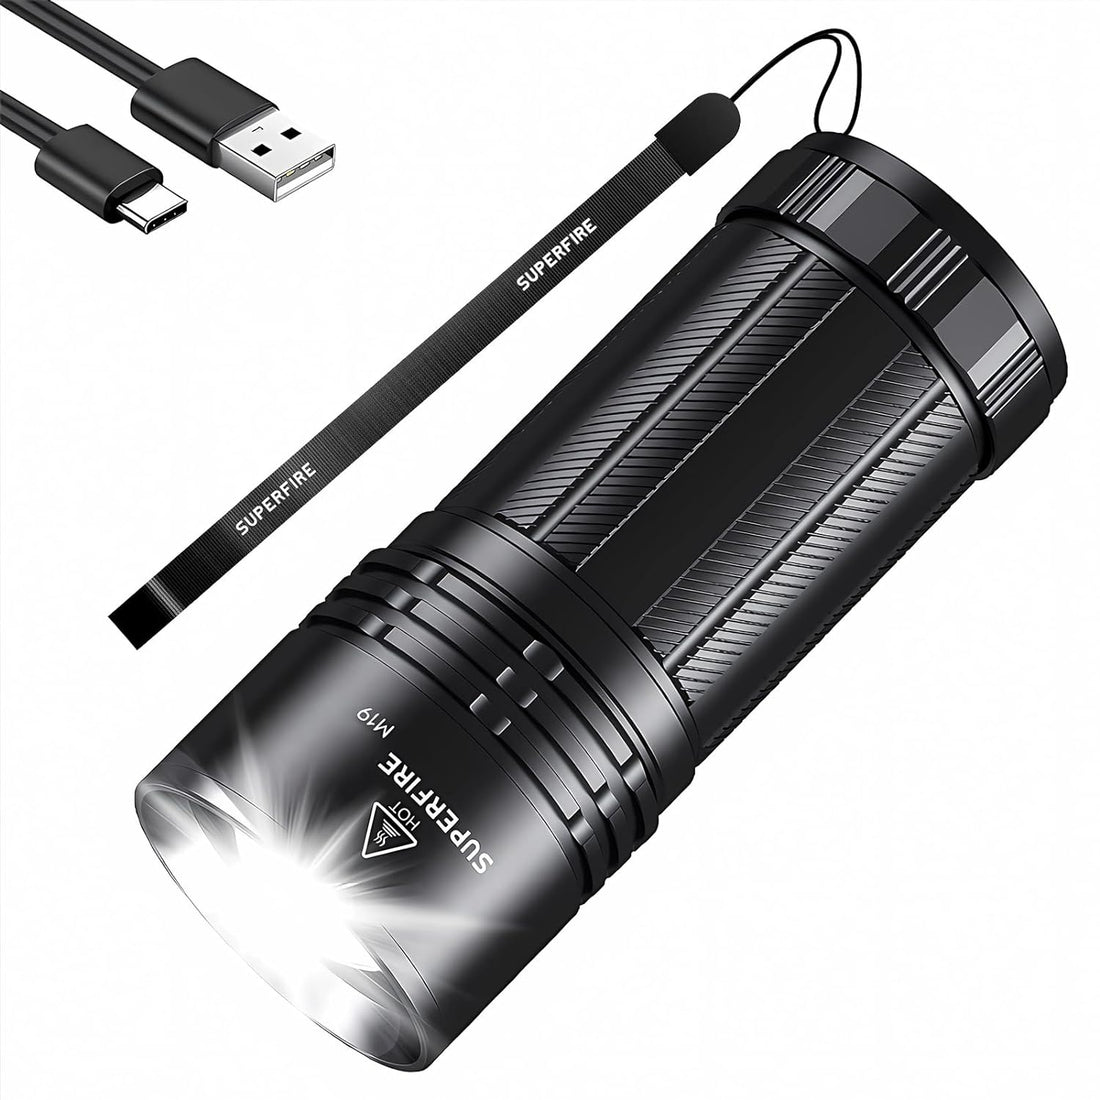 Rechargeable Flashlights High Lumens,6000 Lumen Super Bright Flashlight,LED Lights with Zoomable & 5 Modes,Powerful Handheld Flash Lights for Emergencies, Camping,Outdoor, Water Resistant (Black)